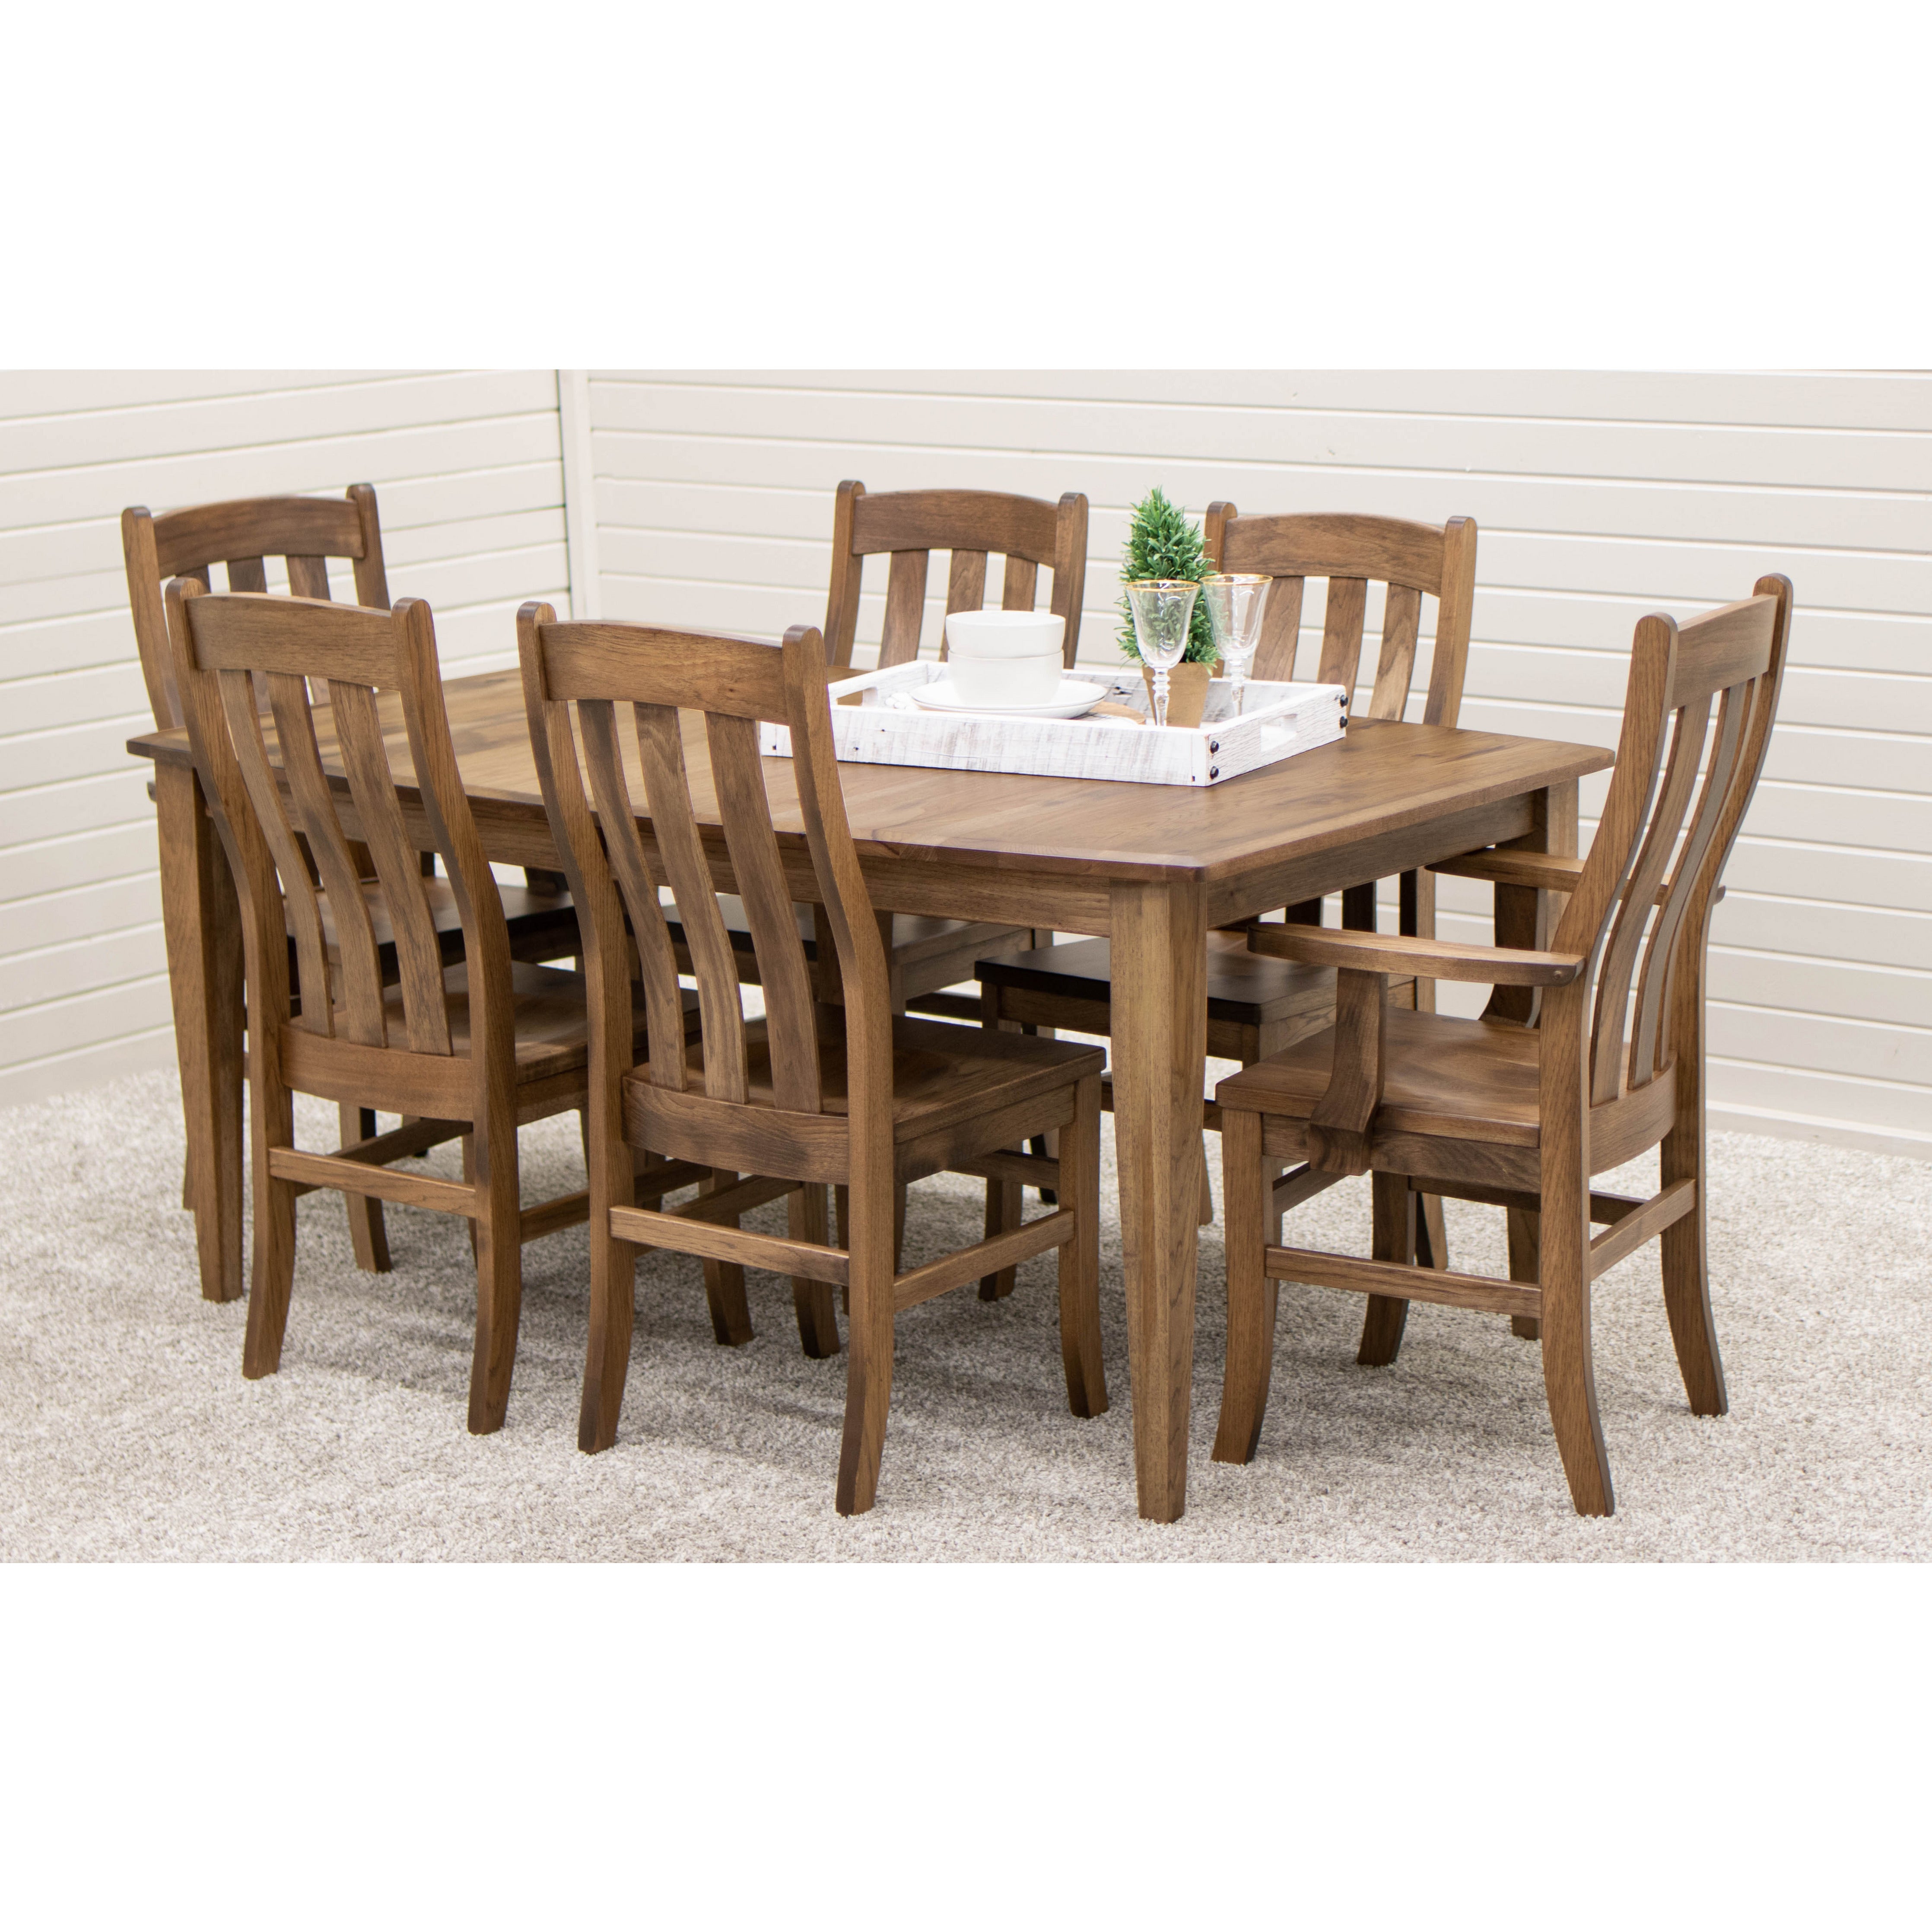 Classic Shaker Extending Dining Table